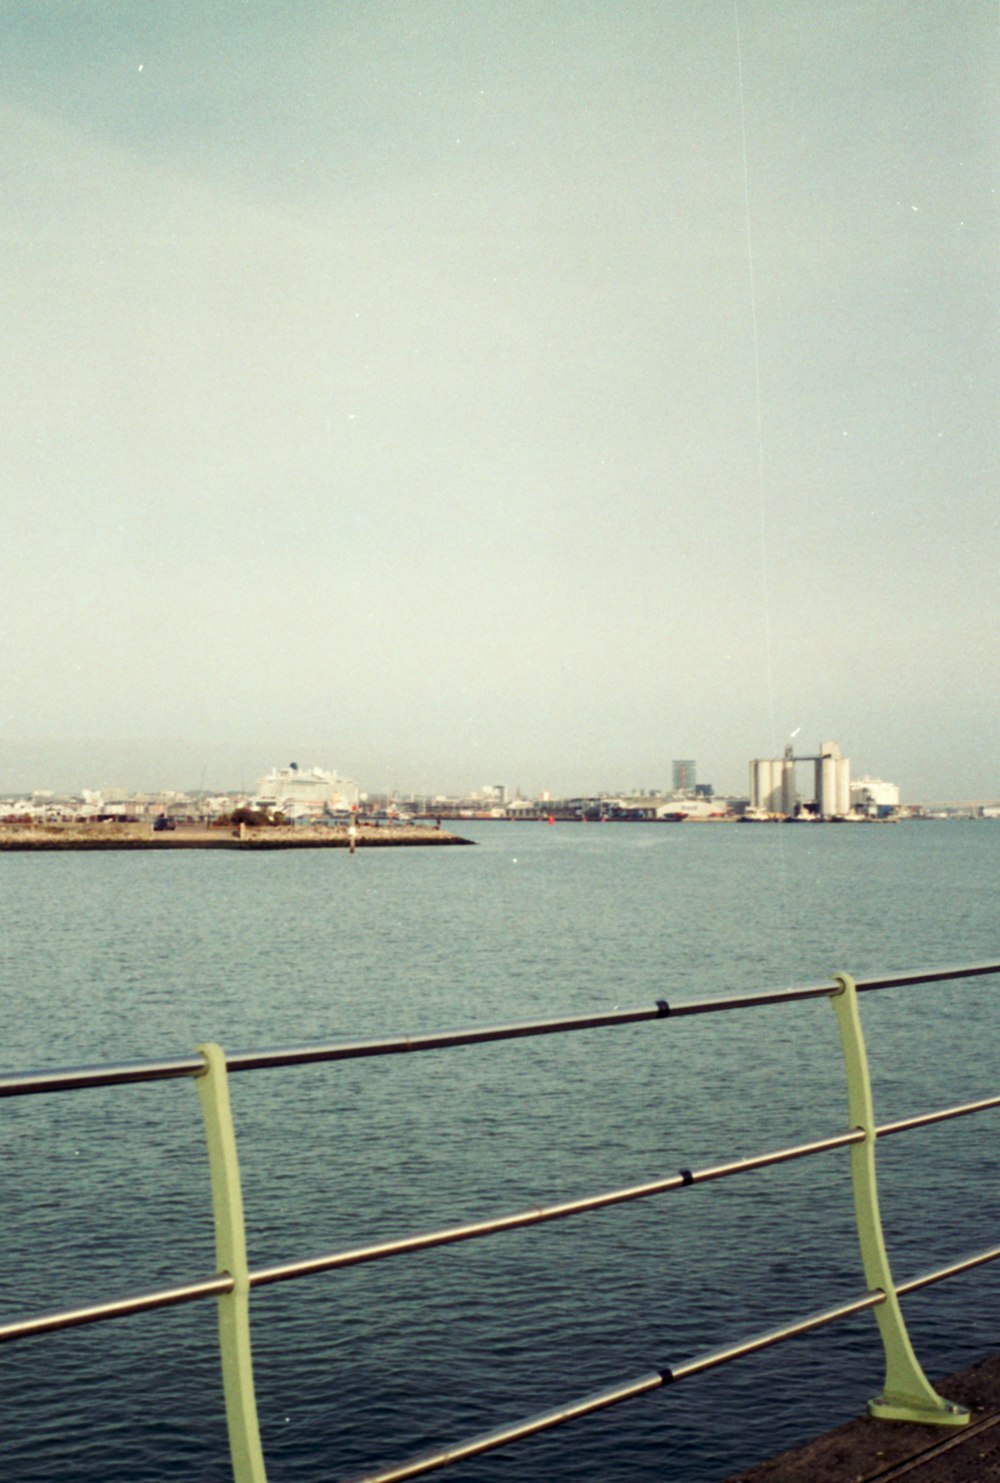 a view of a body of water with a city in the background